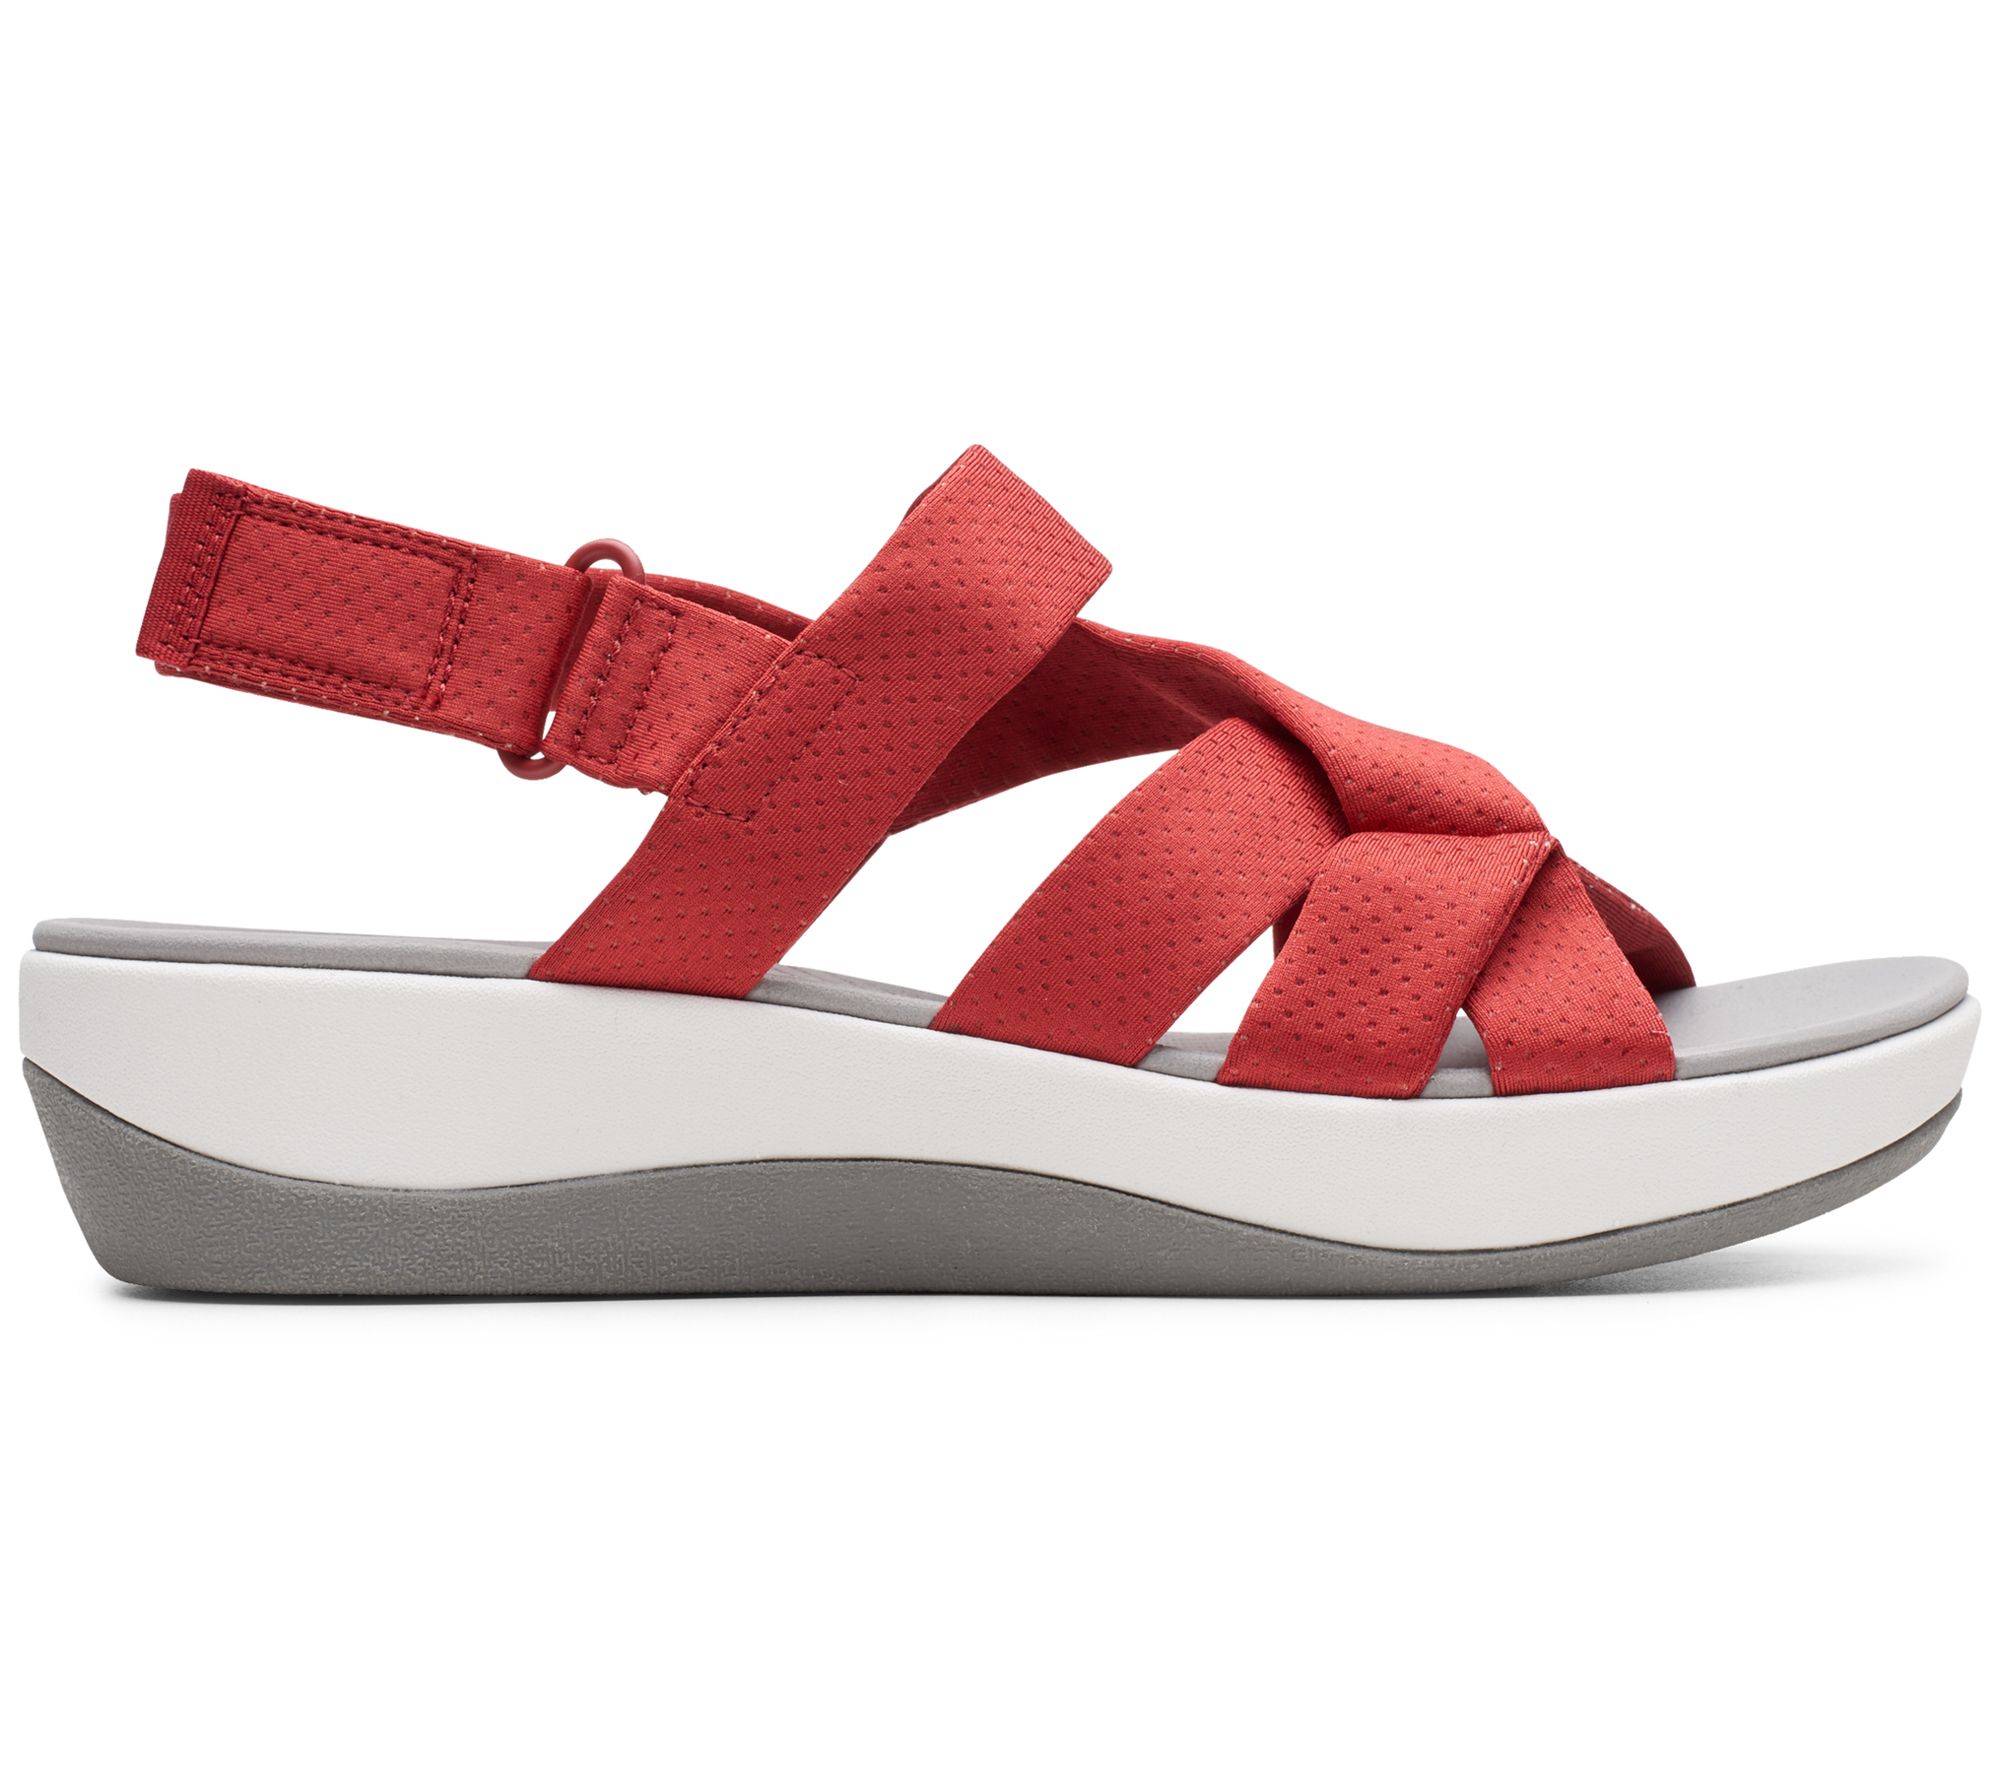 cloudsteppers by clarks sport sandals